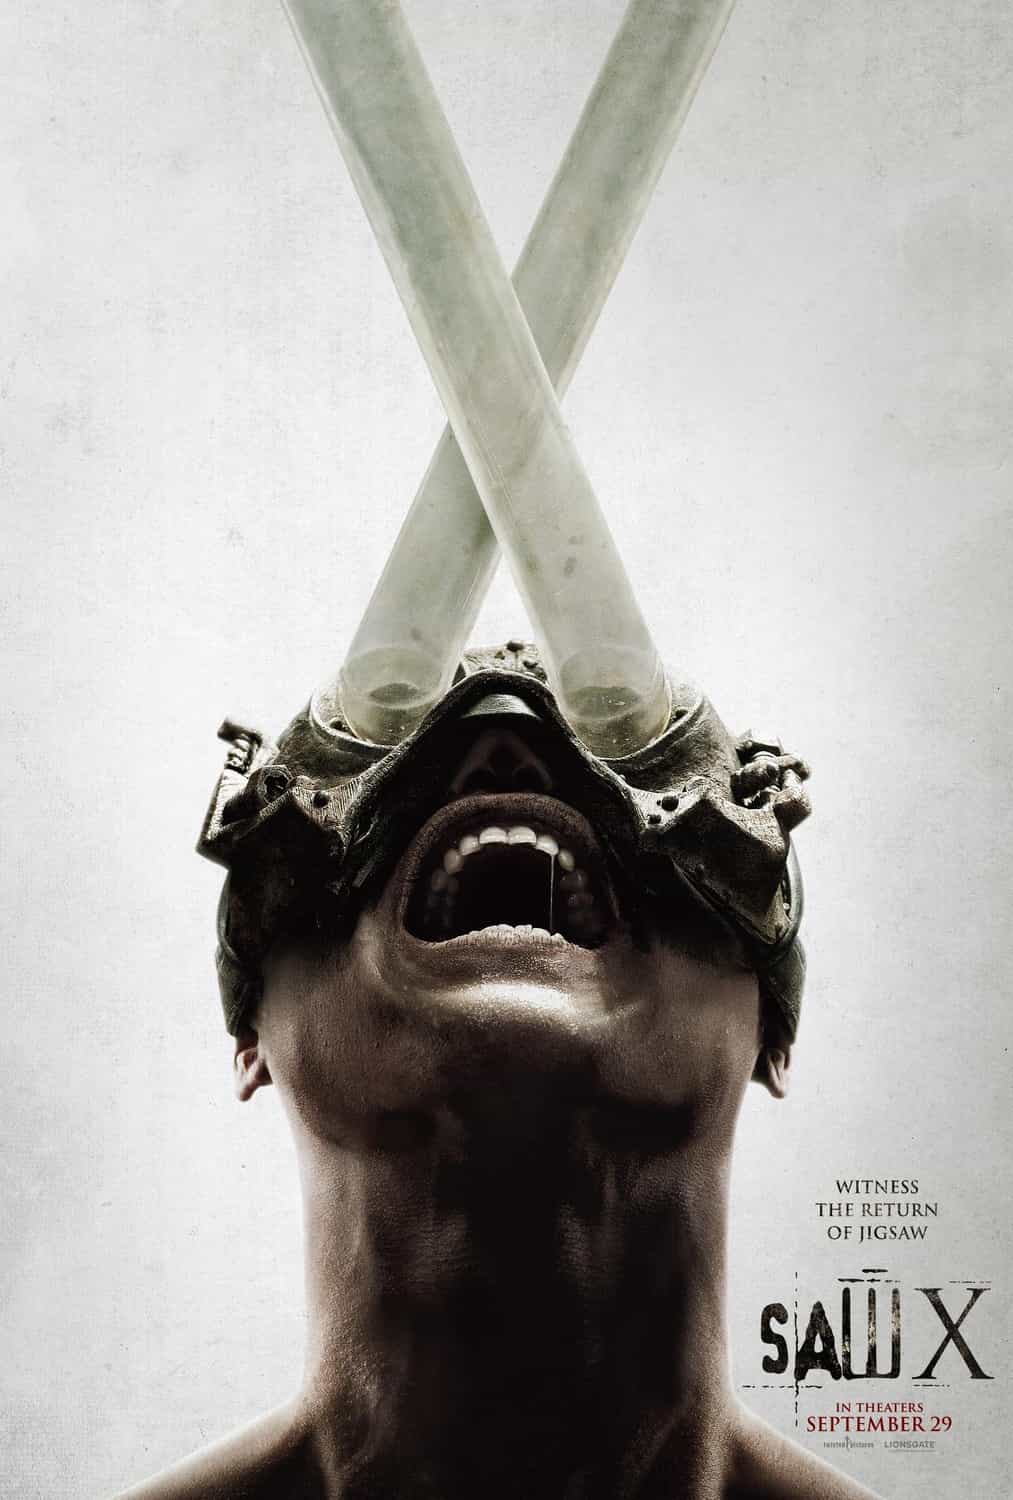 Check out the new trailer for upcoming movie Saw X which stars Michael Beach and Tobin Bell - movie UK release date 27th October 2023 #sawx